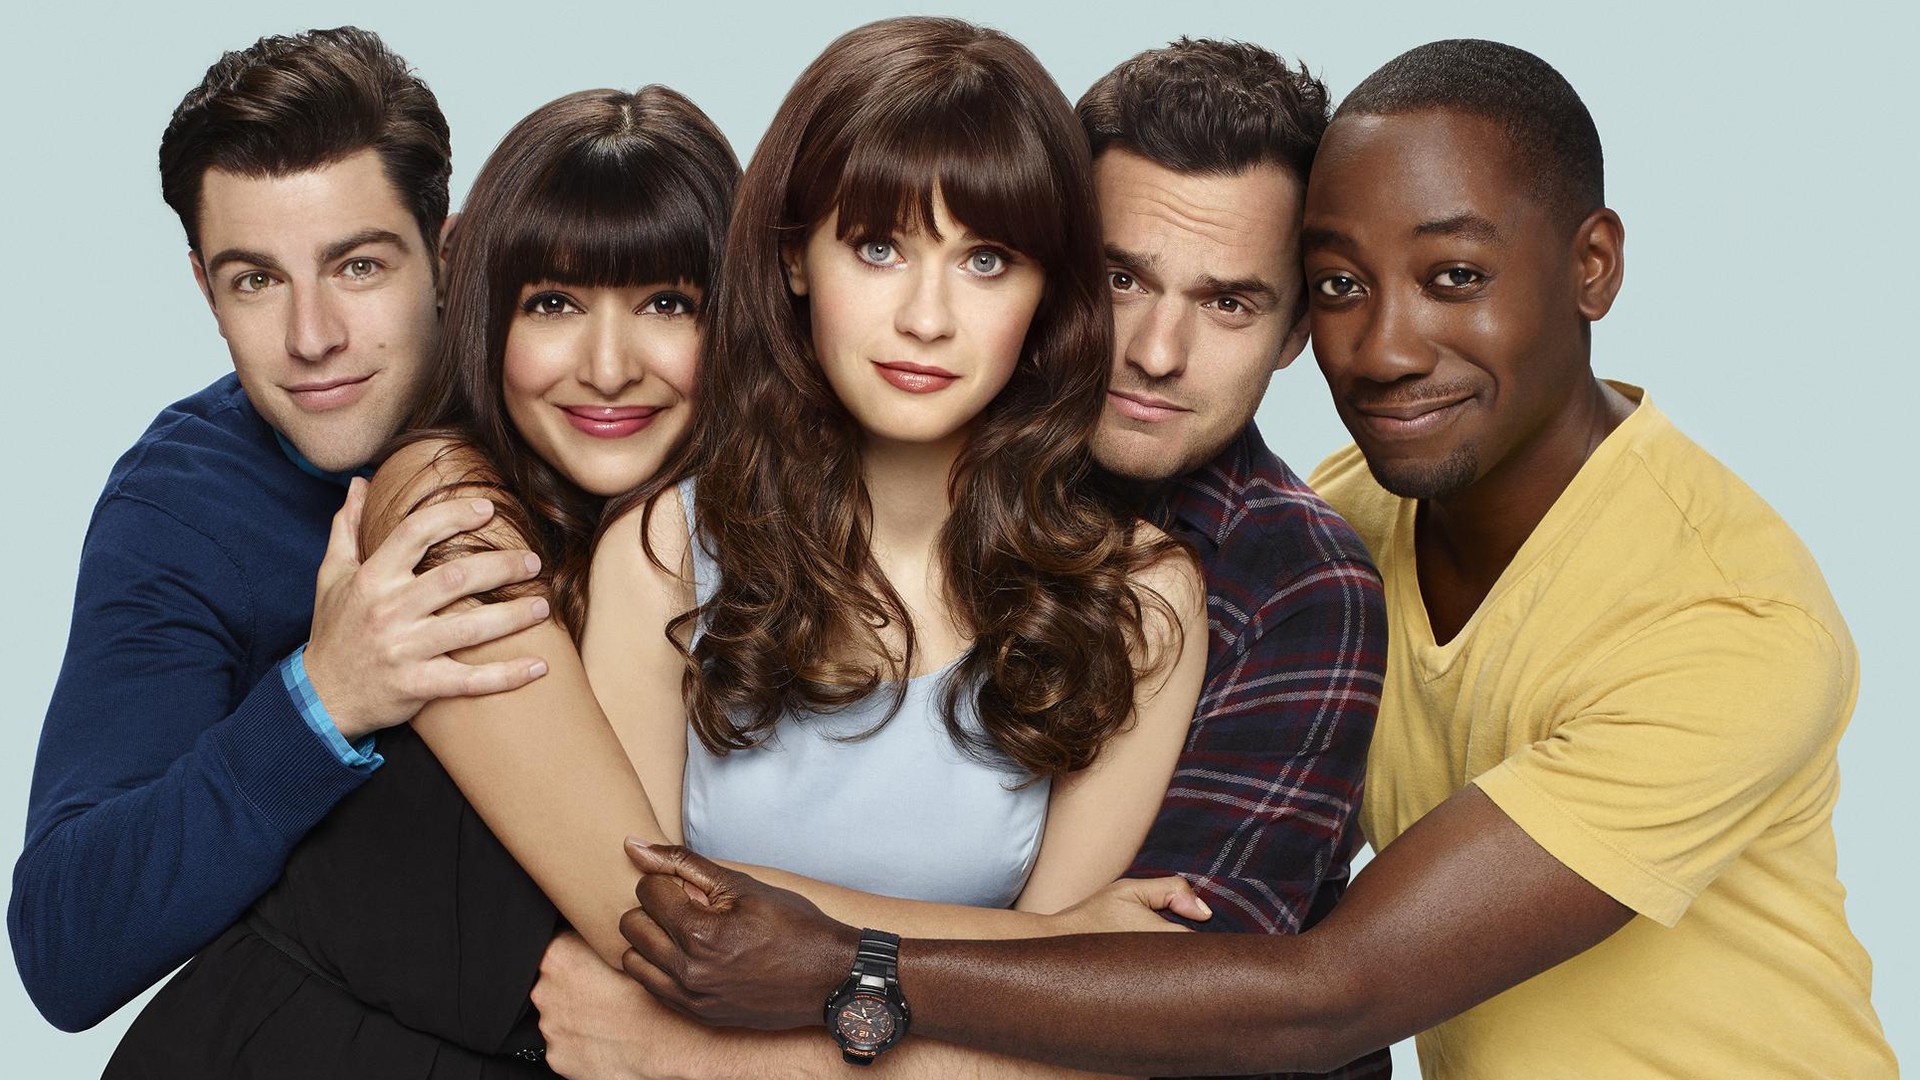 New Girl Picture